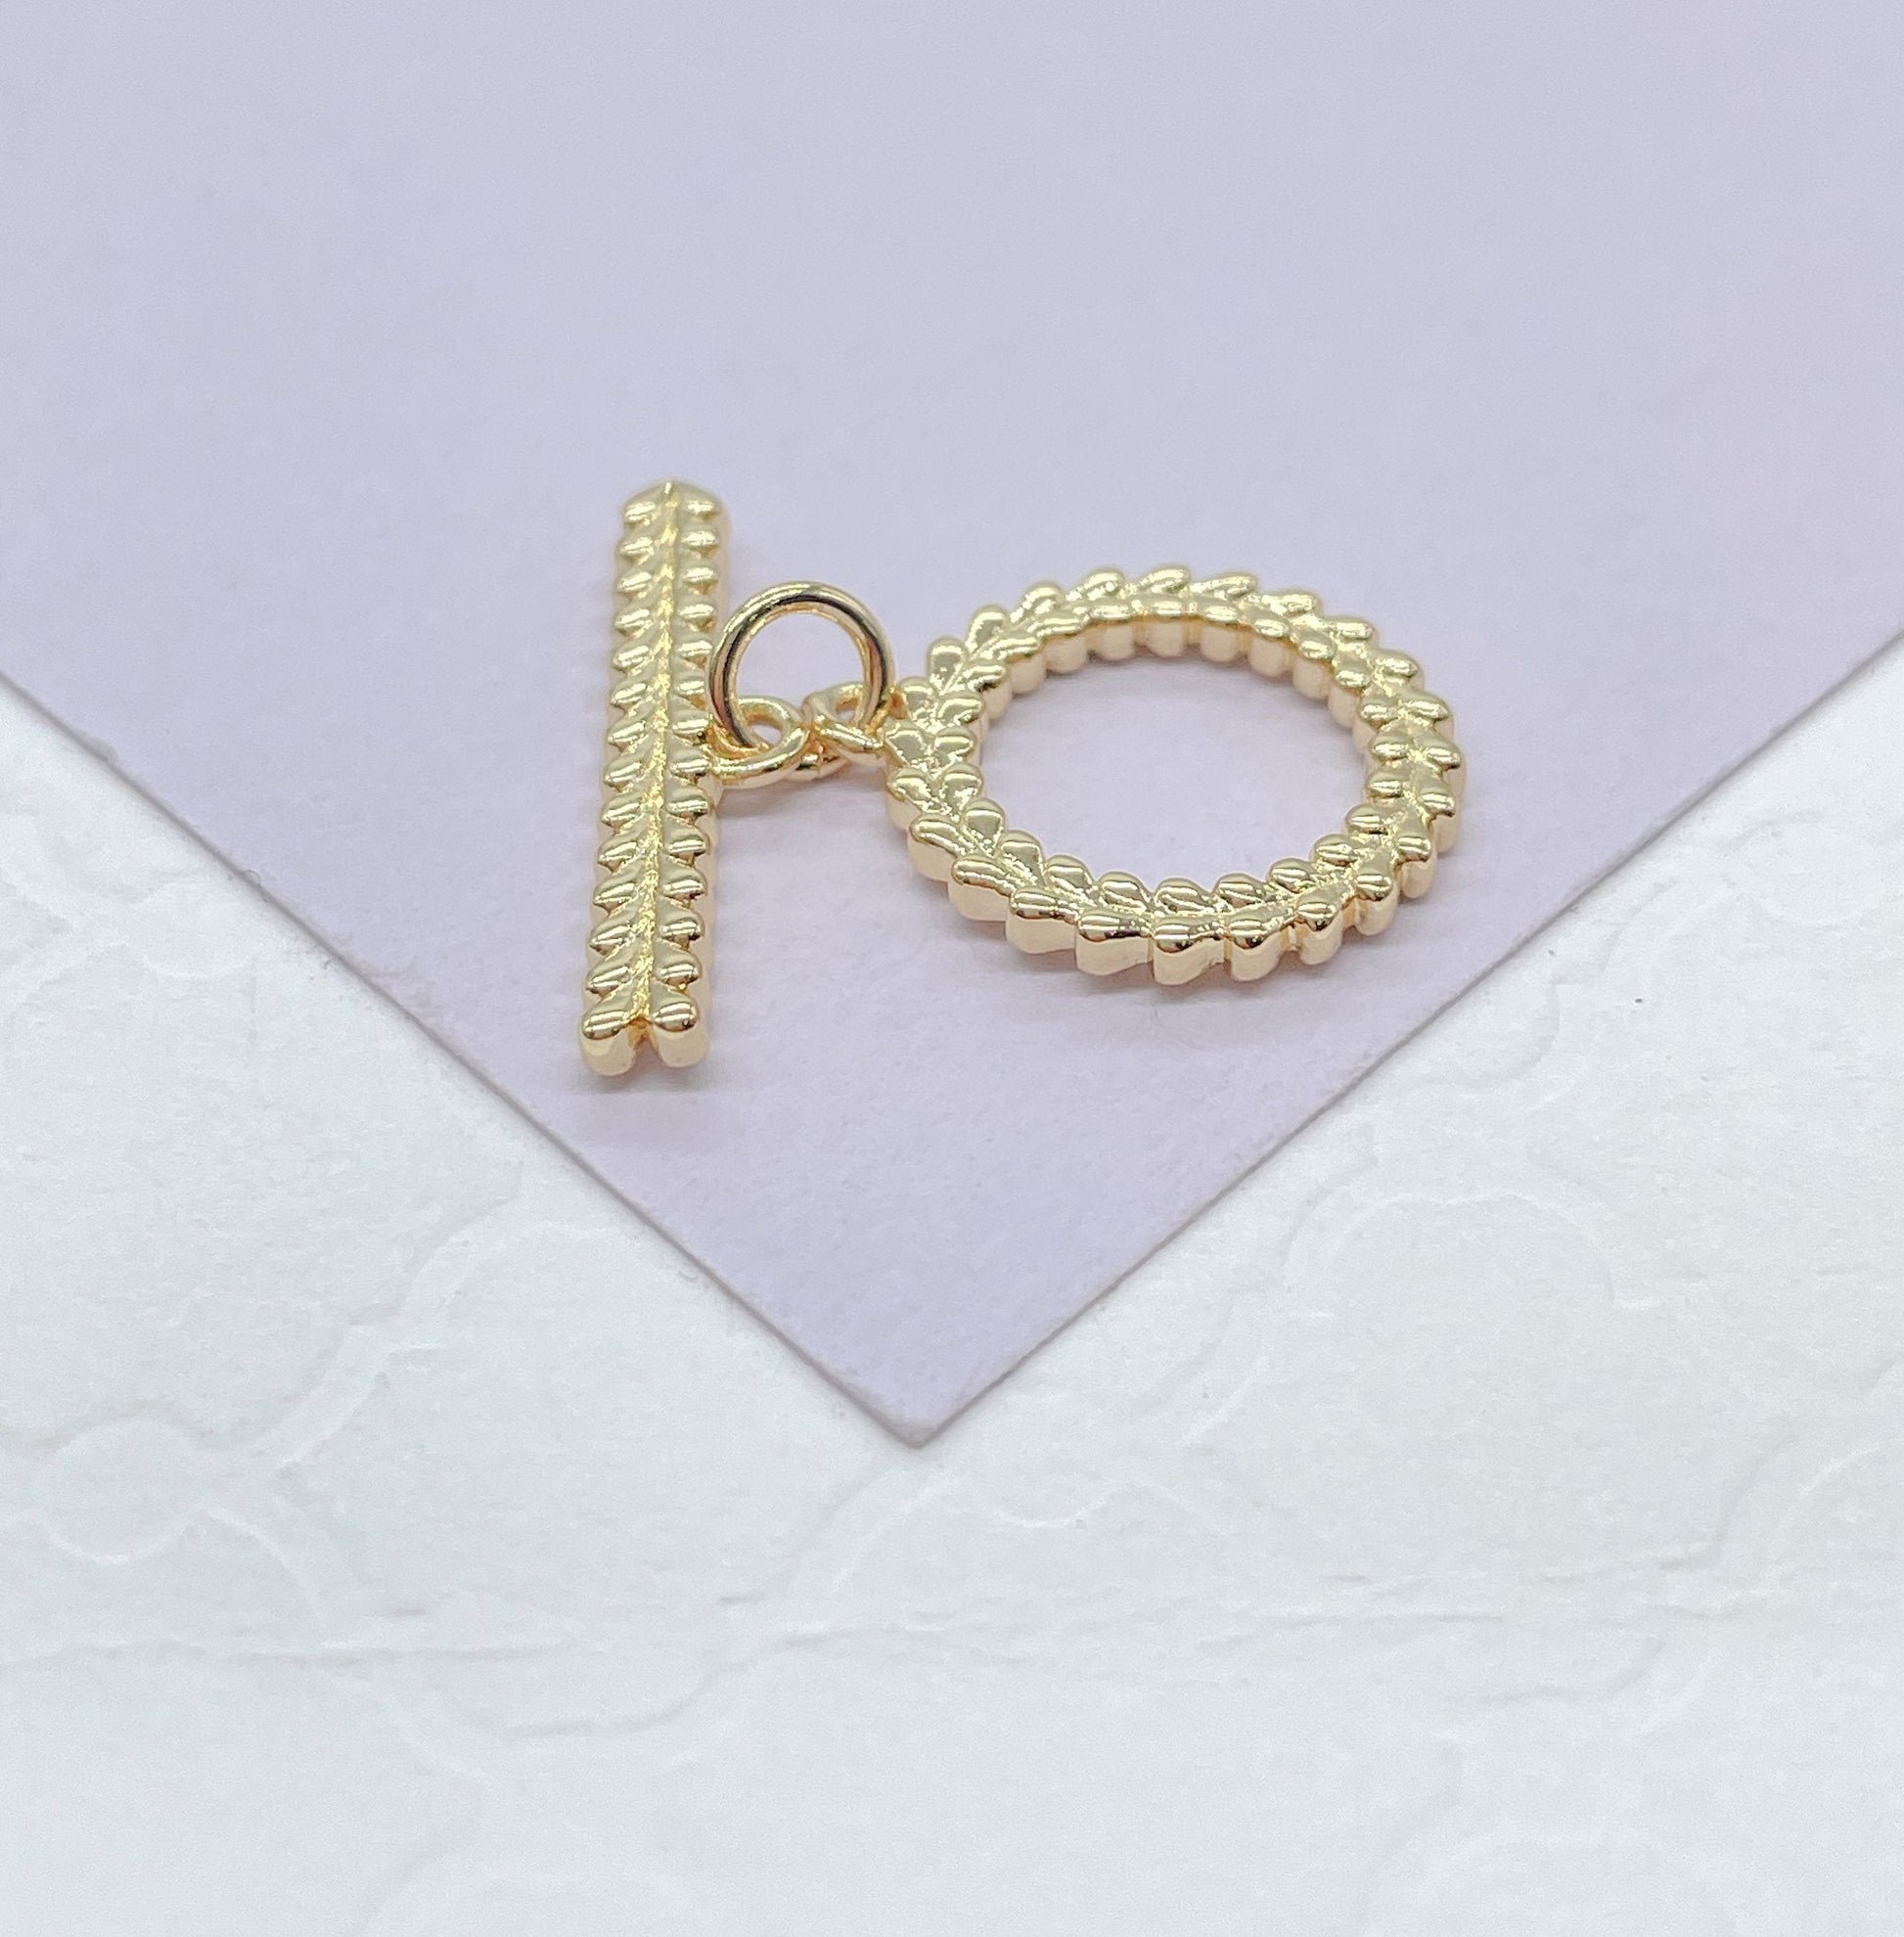 18k Gold Filled Toggle Clasps Available in Various Styles Made for Jewlery Making